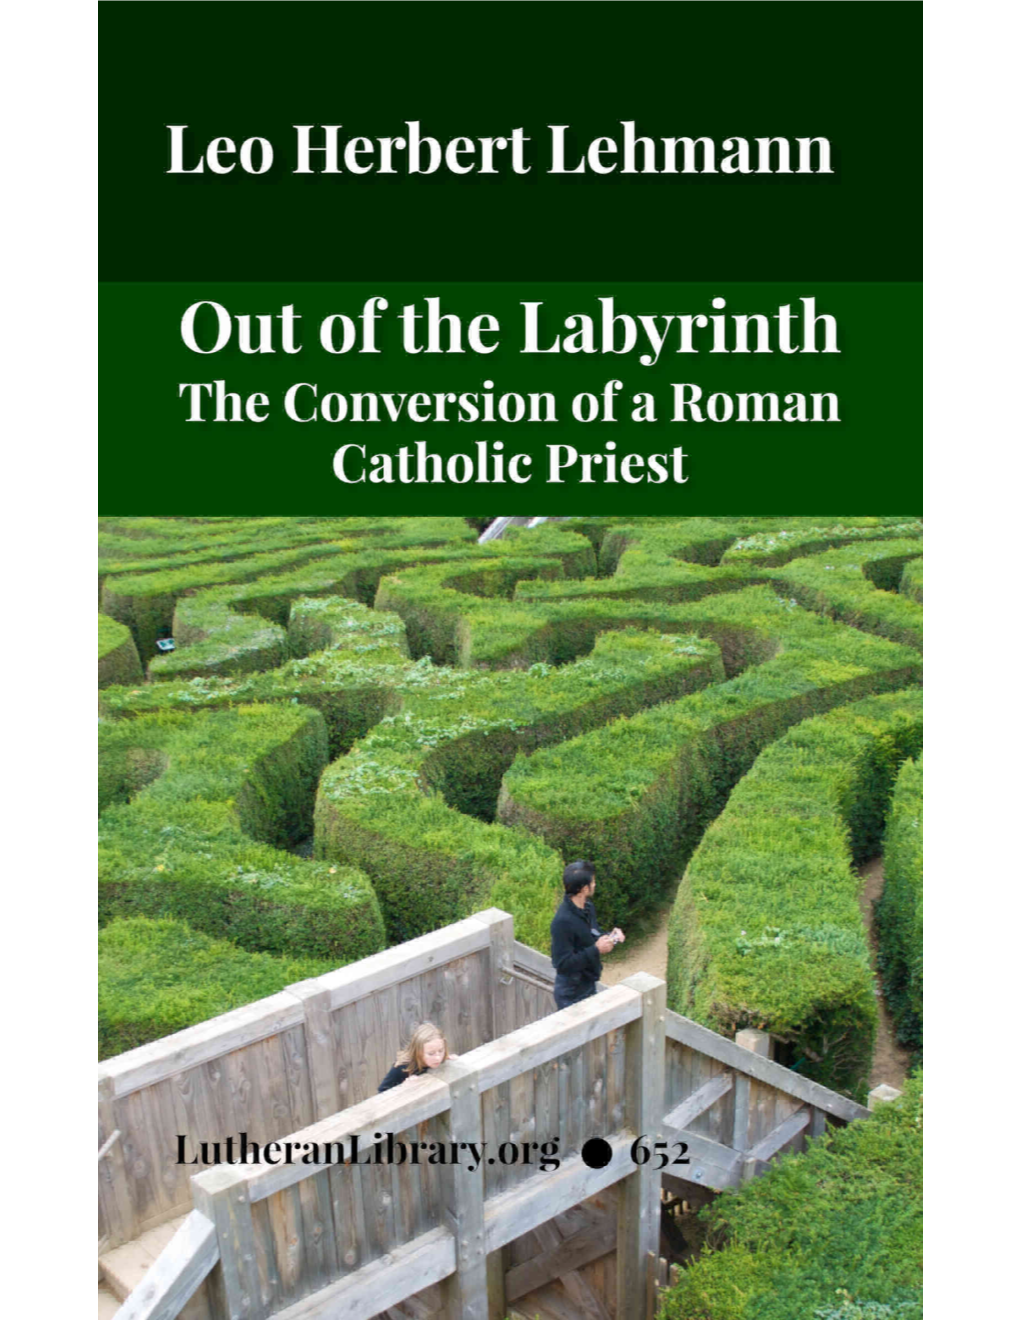 Out of the Labyrinth: the Conversion of a Roman Catholic Priest